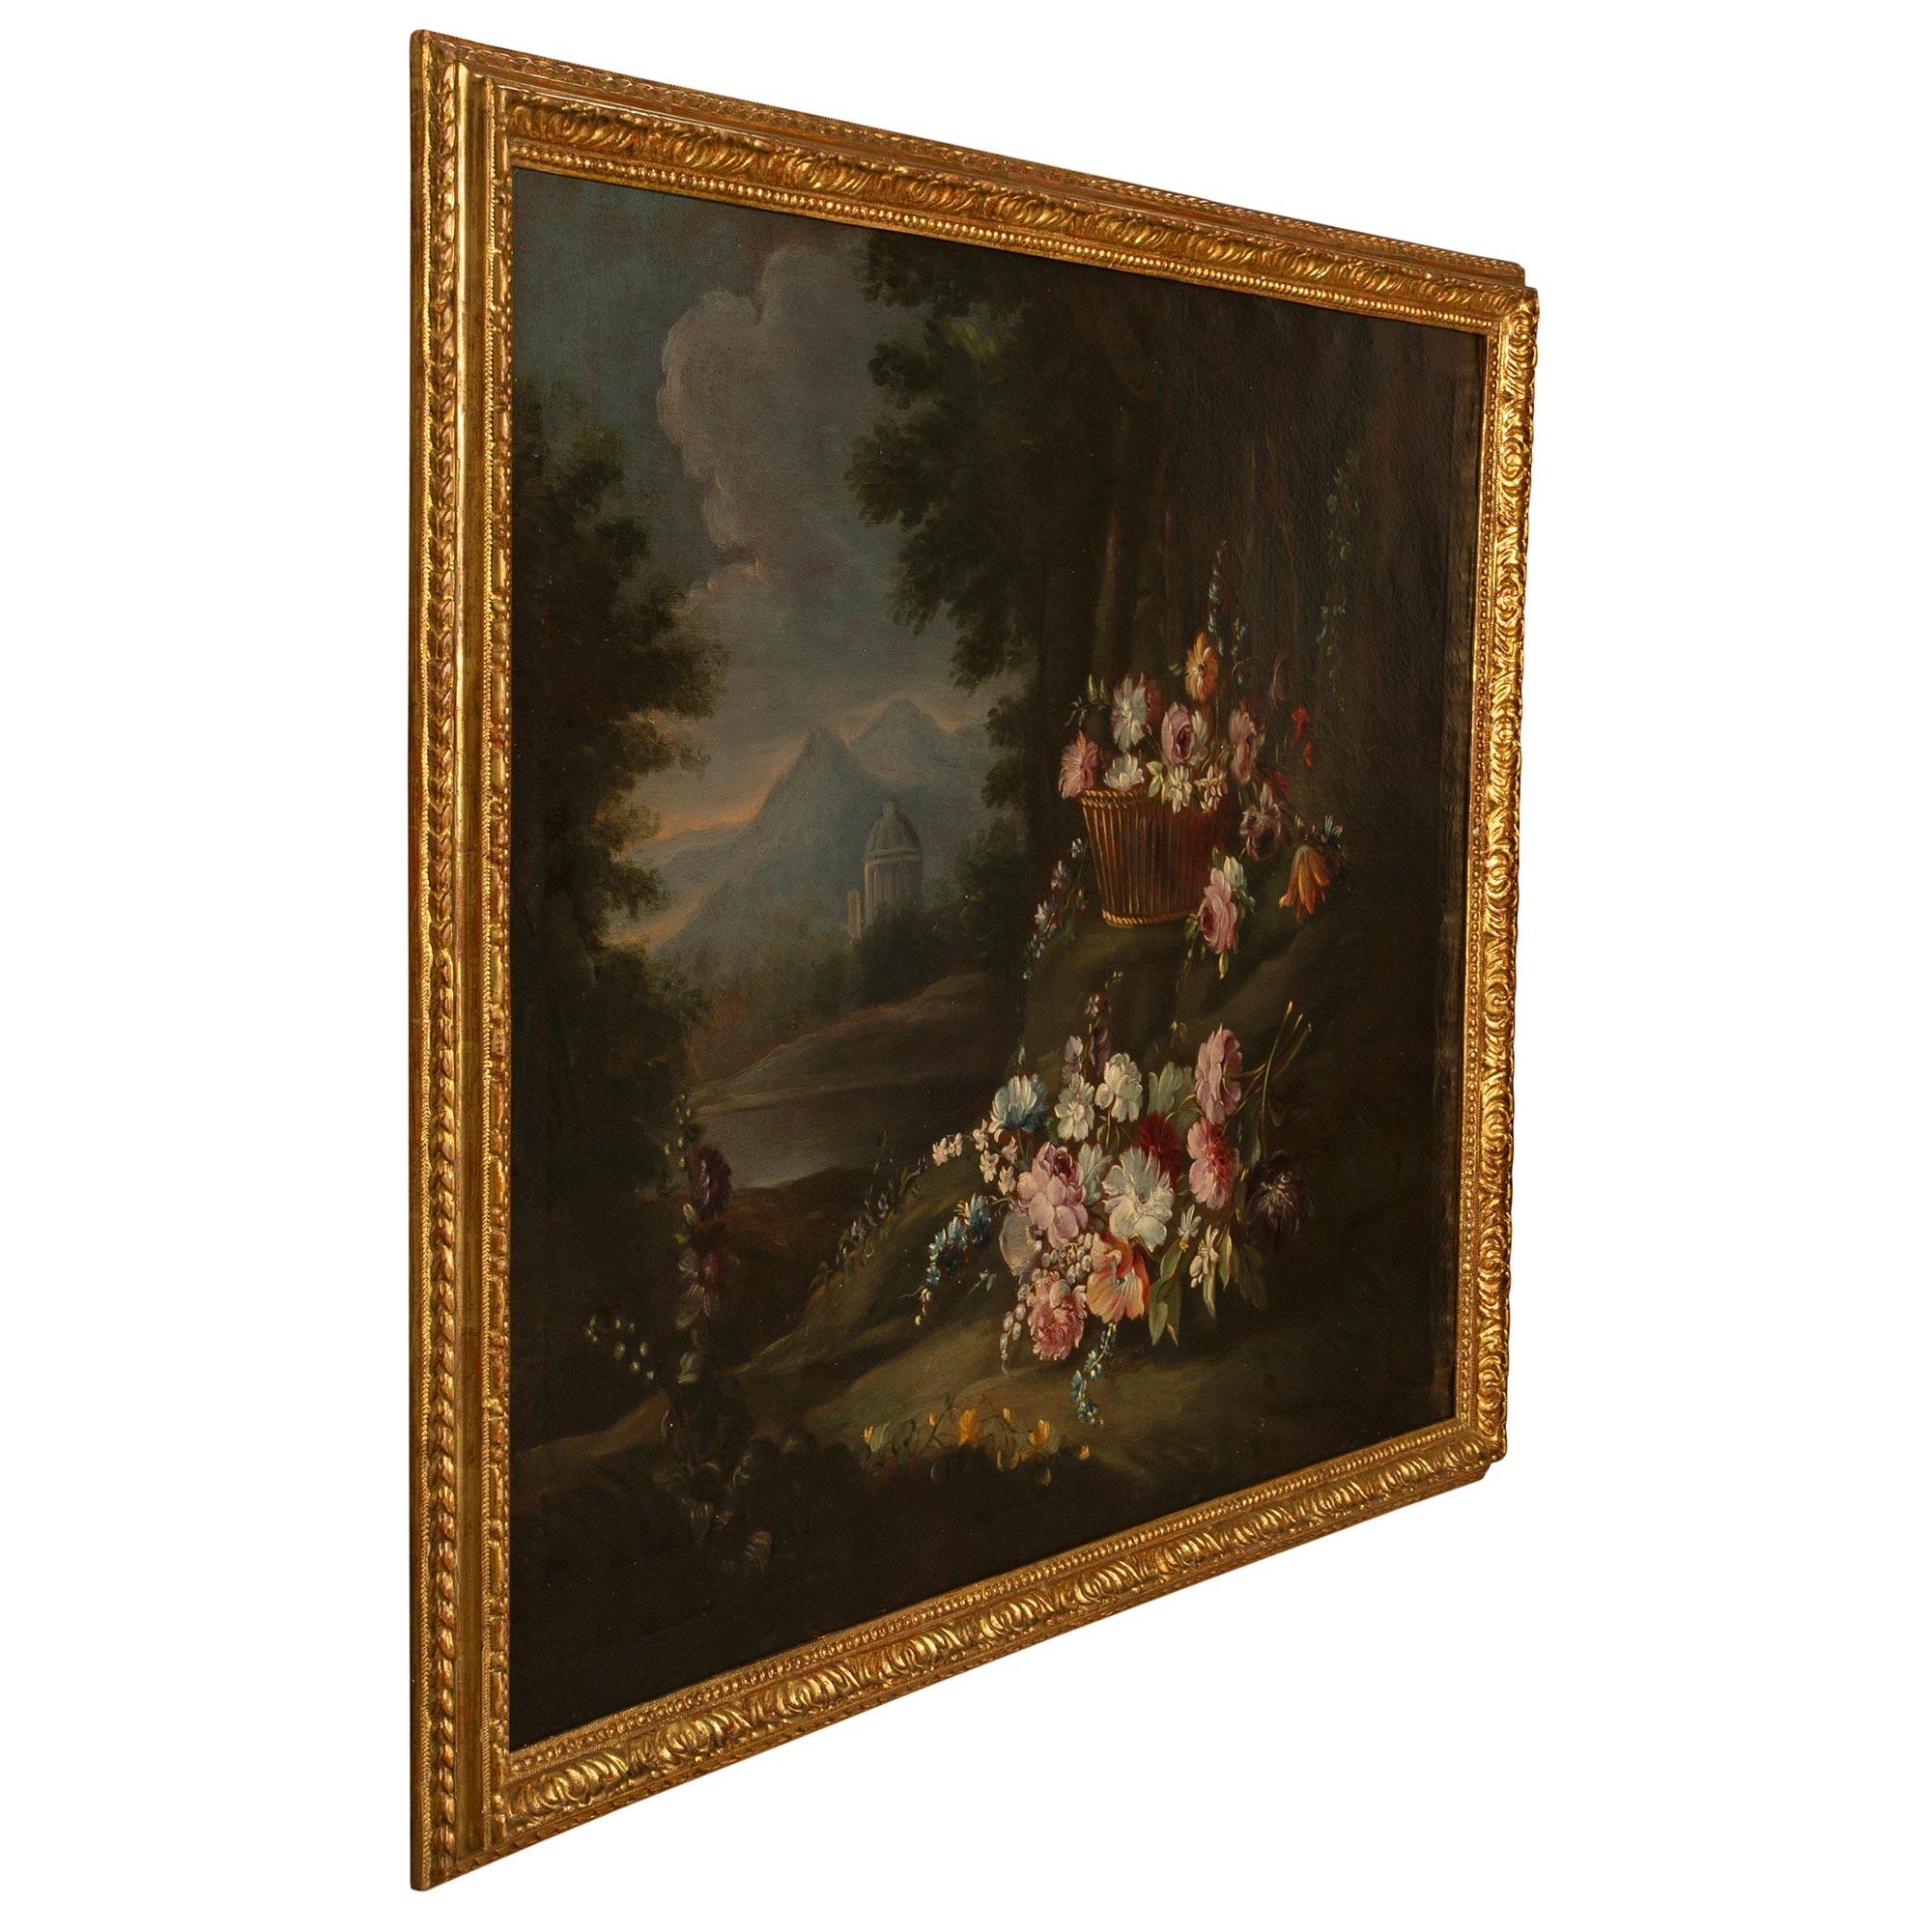 A beautiful and charming Italian 18th century Louis XVI period oil on canvas still life painting in its original giltwood frame. The painting depicts wonderfully executed and finely detailed colorful flowers on a clearing in the forest. Assembled in